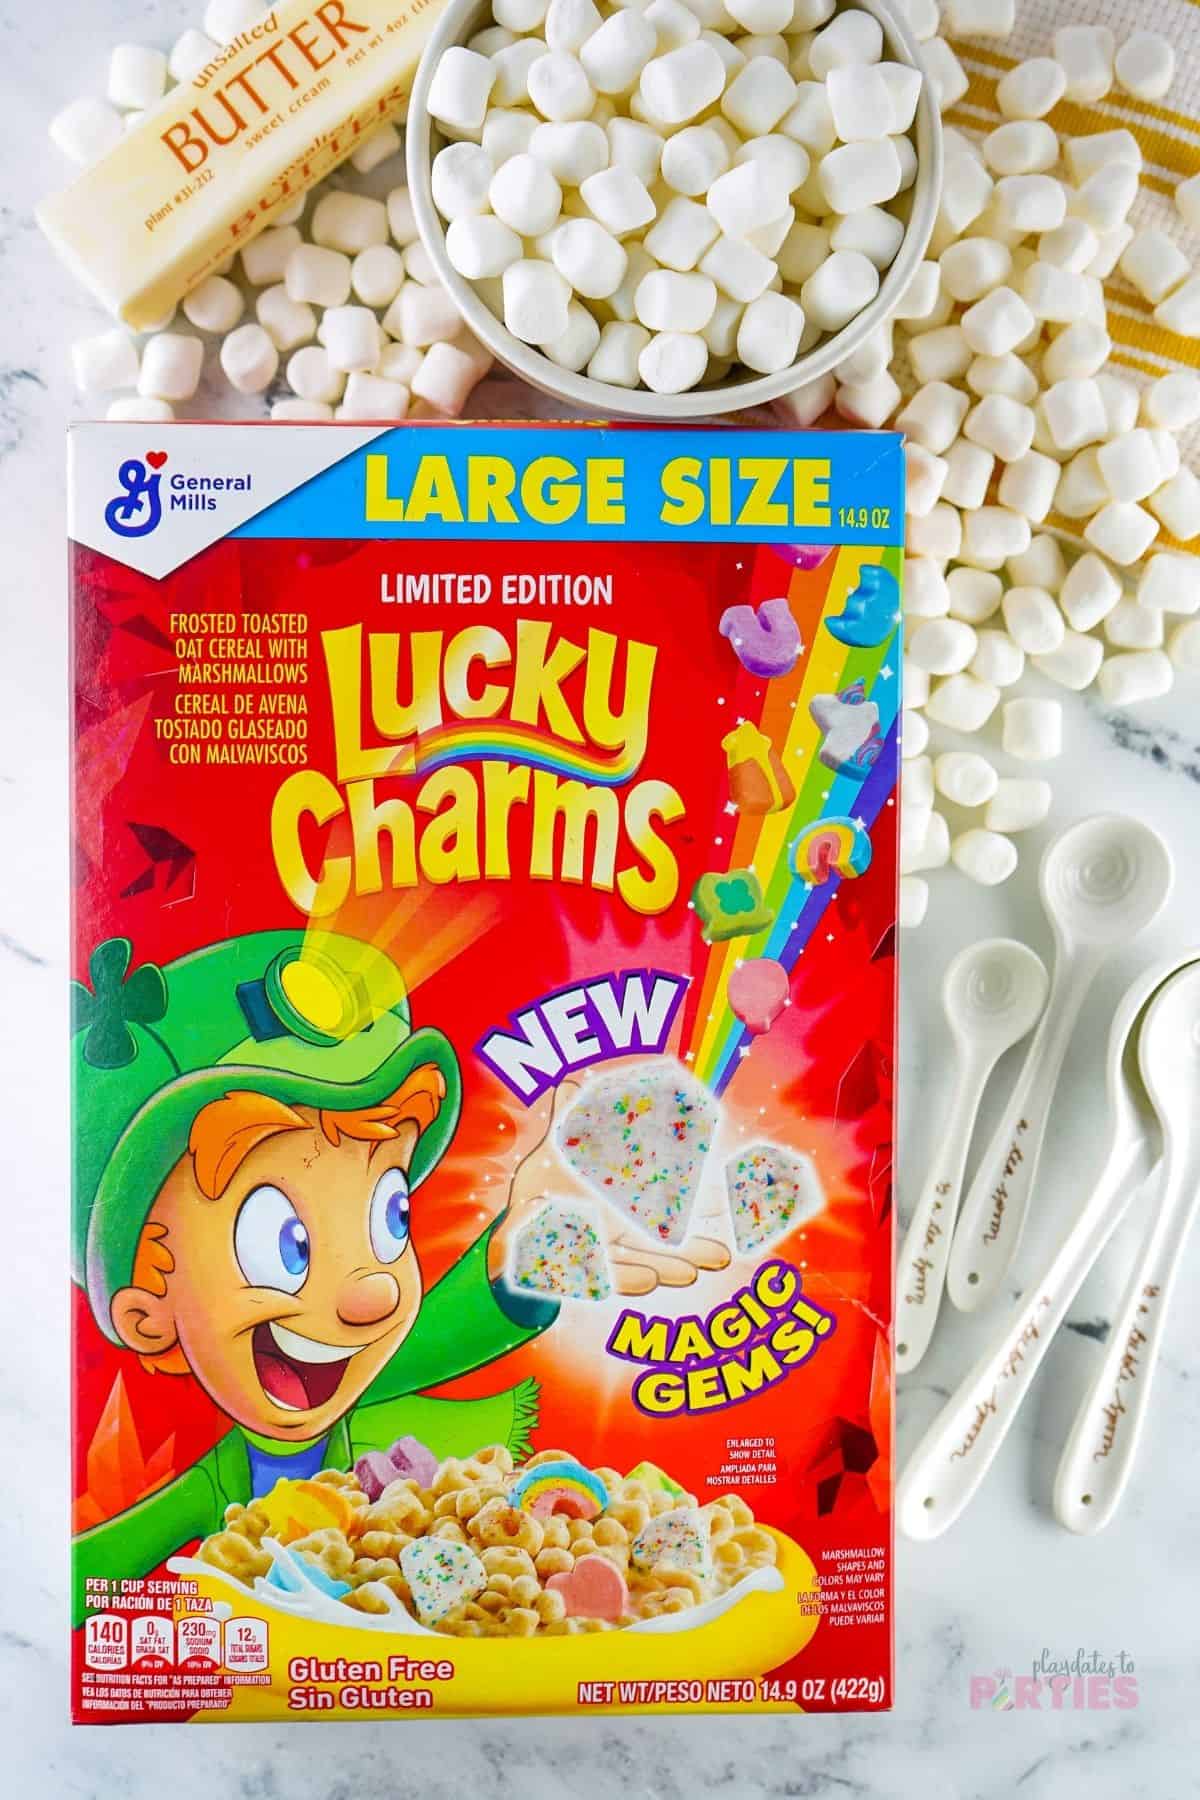 Ingredients include Lucky charms cereal, marshmallows, and butter.